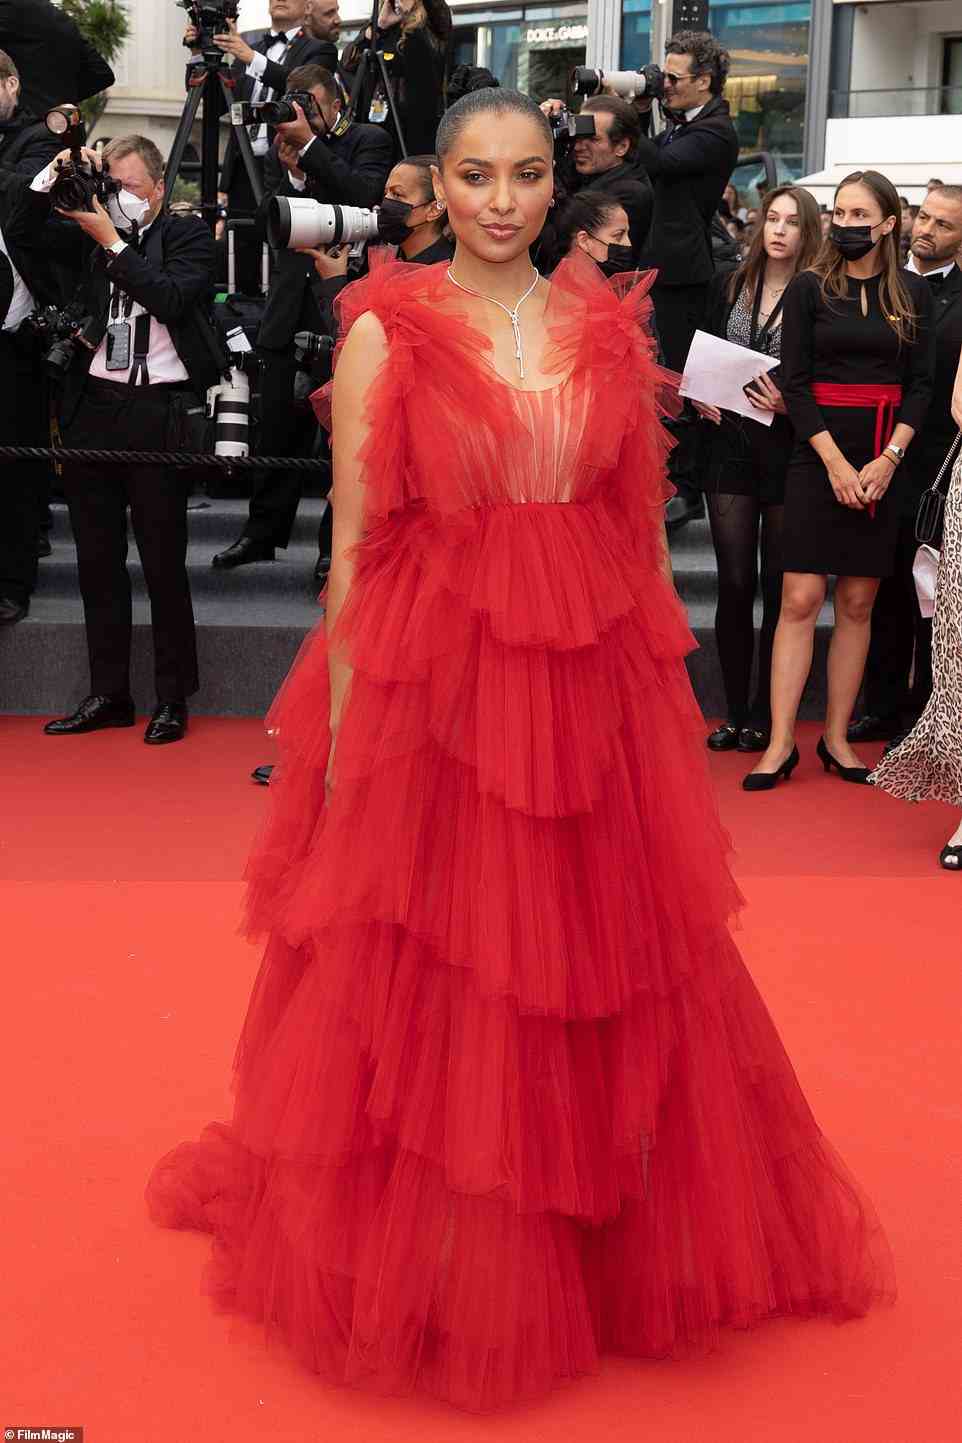 Lady in red: Kat Graham looked gorgeous in a dramatic red layered tulle dress